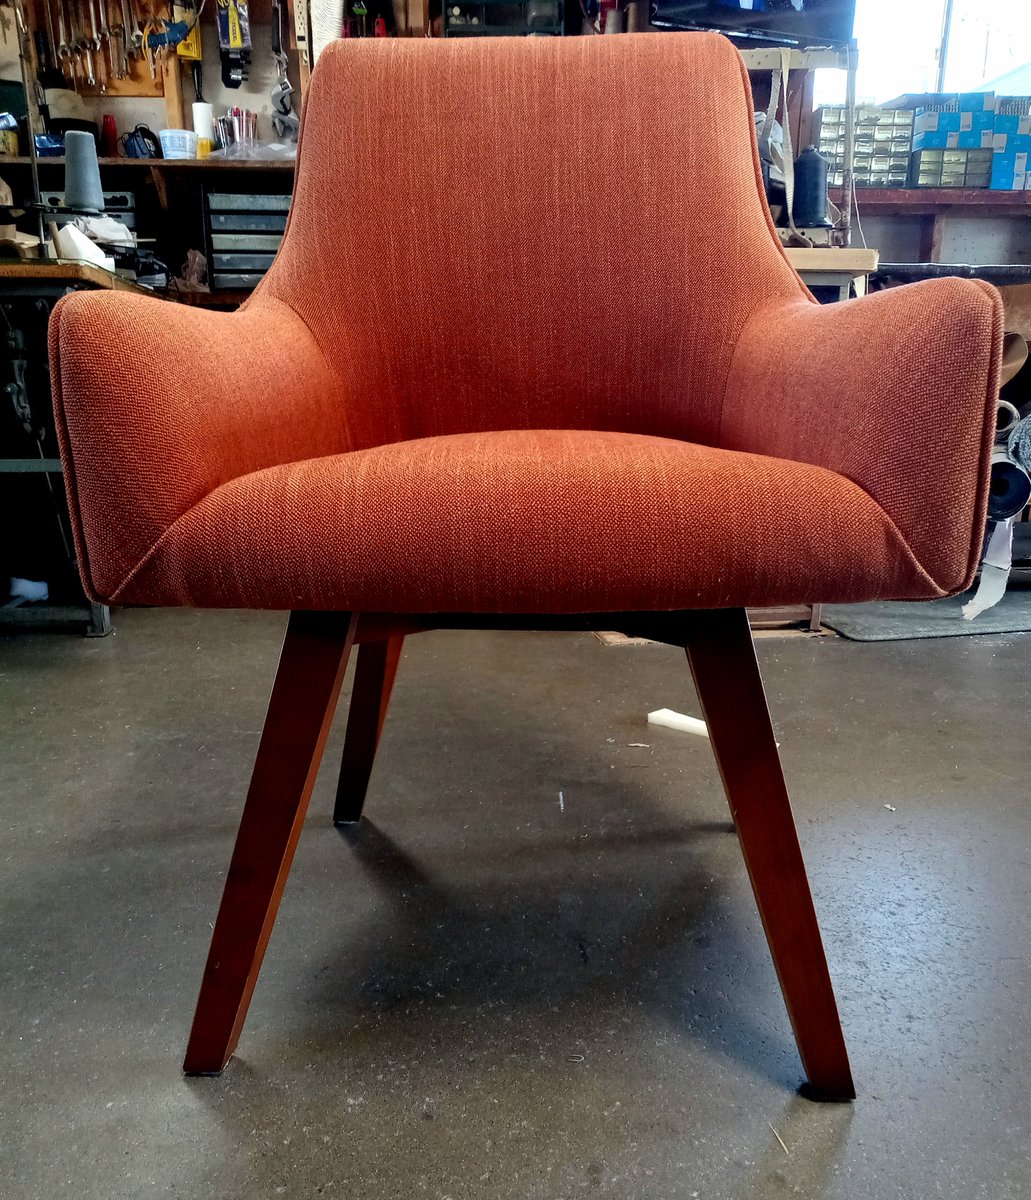 Redid this baby.
The color: 🔥🔥🔥
#andresupholstery
#andrecustomupholstery
#andrescustomupholstery
#andrecustomupholstery
#reupholstery
#upholsteryscottsdale
#scottsdaleupholstery
#gilbertupholstery
#mesaupholstery
#residentialupholstery